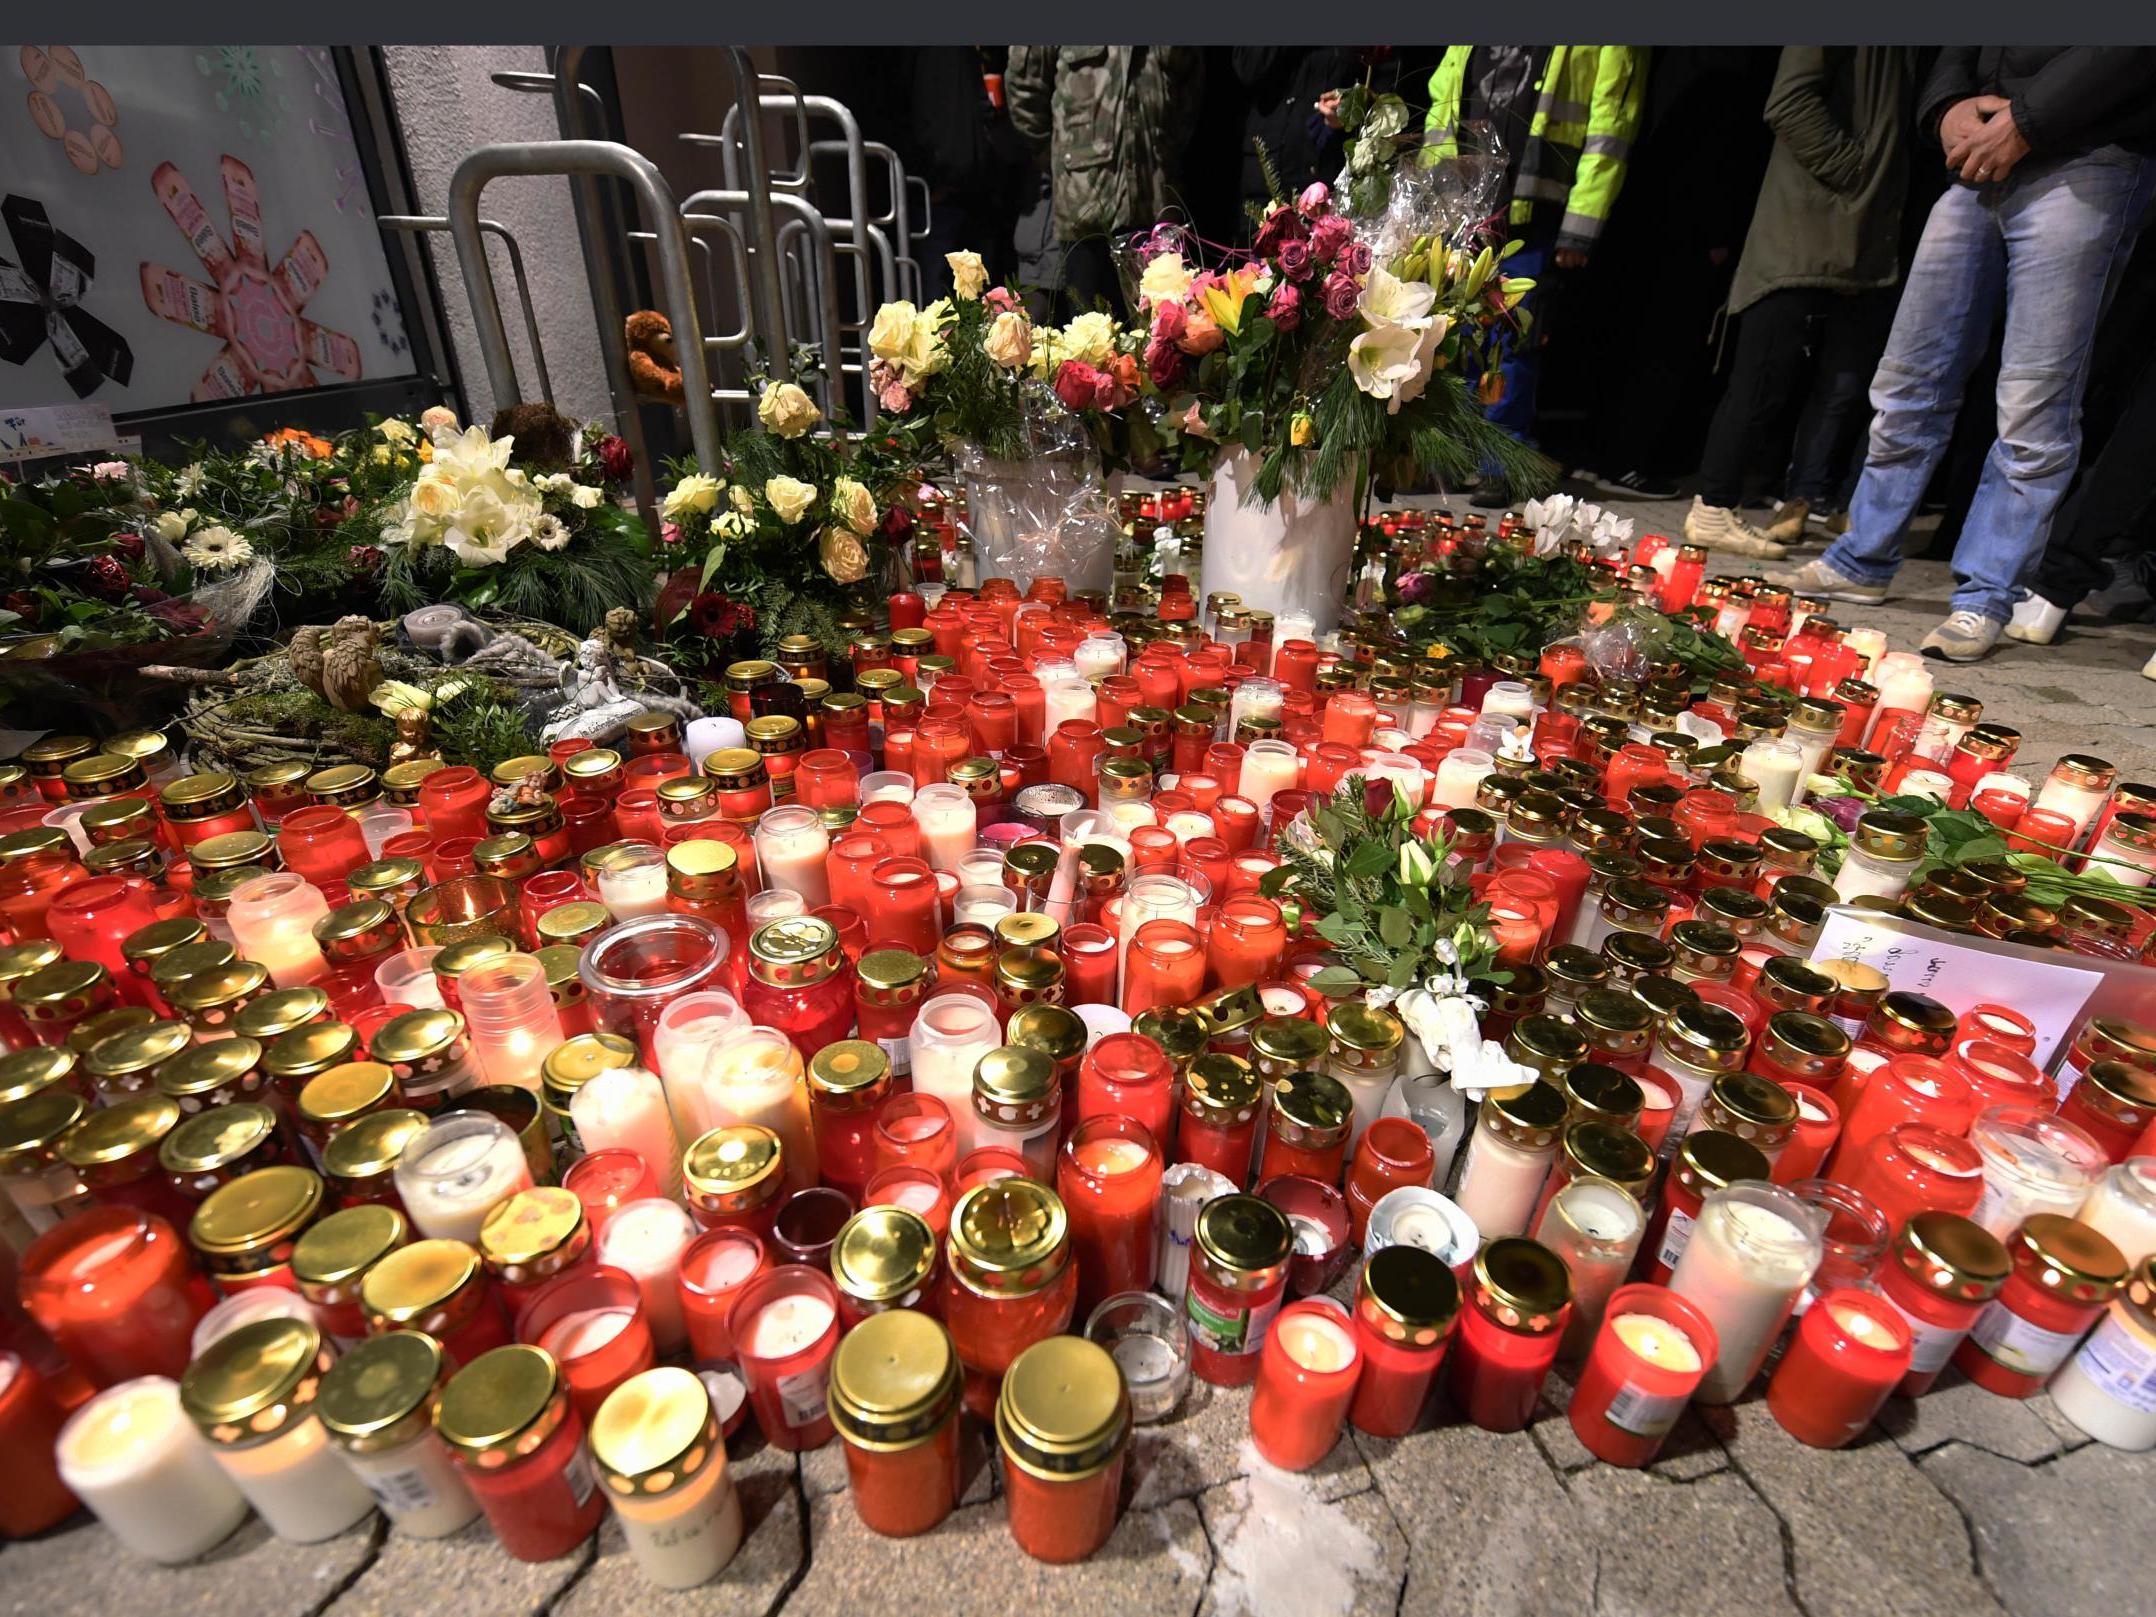 The killing of the 15-year-old girl in the town of Kandel shocked citizens across Germany